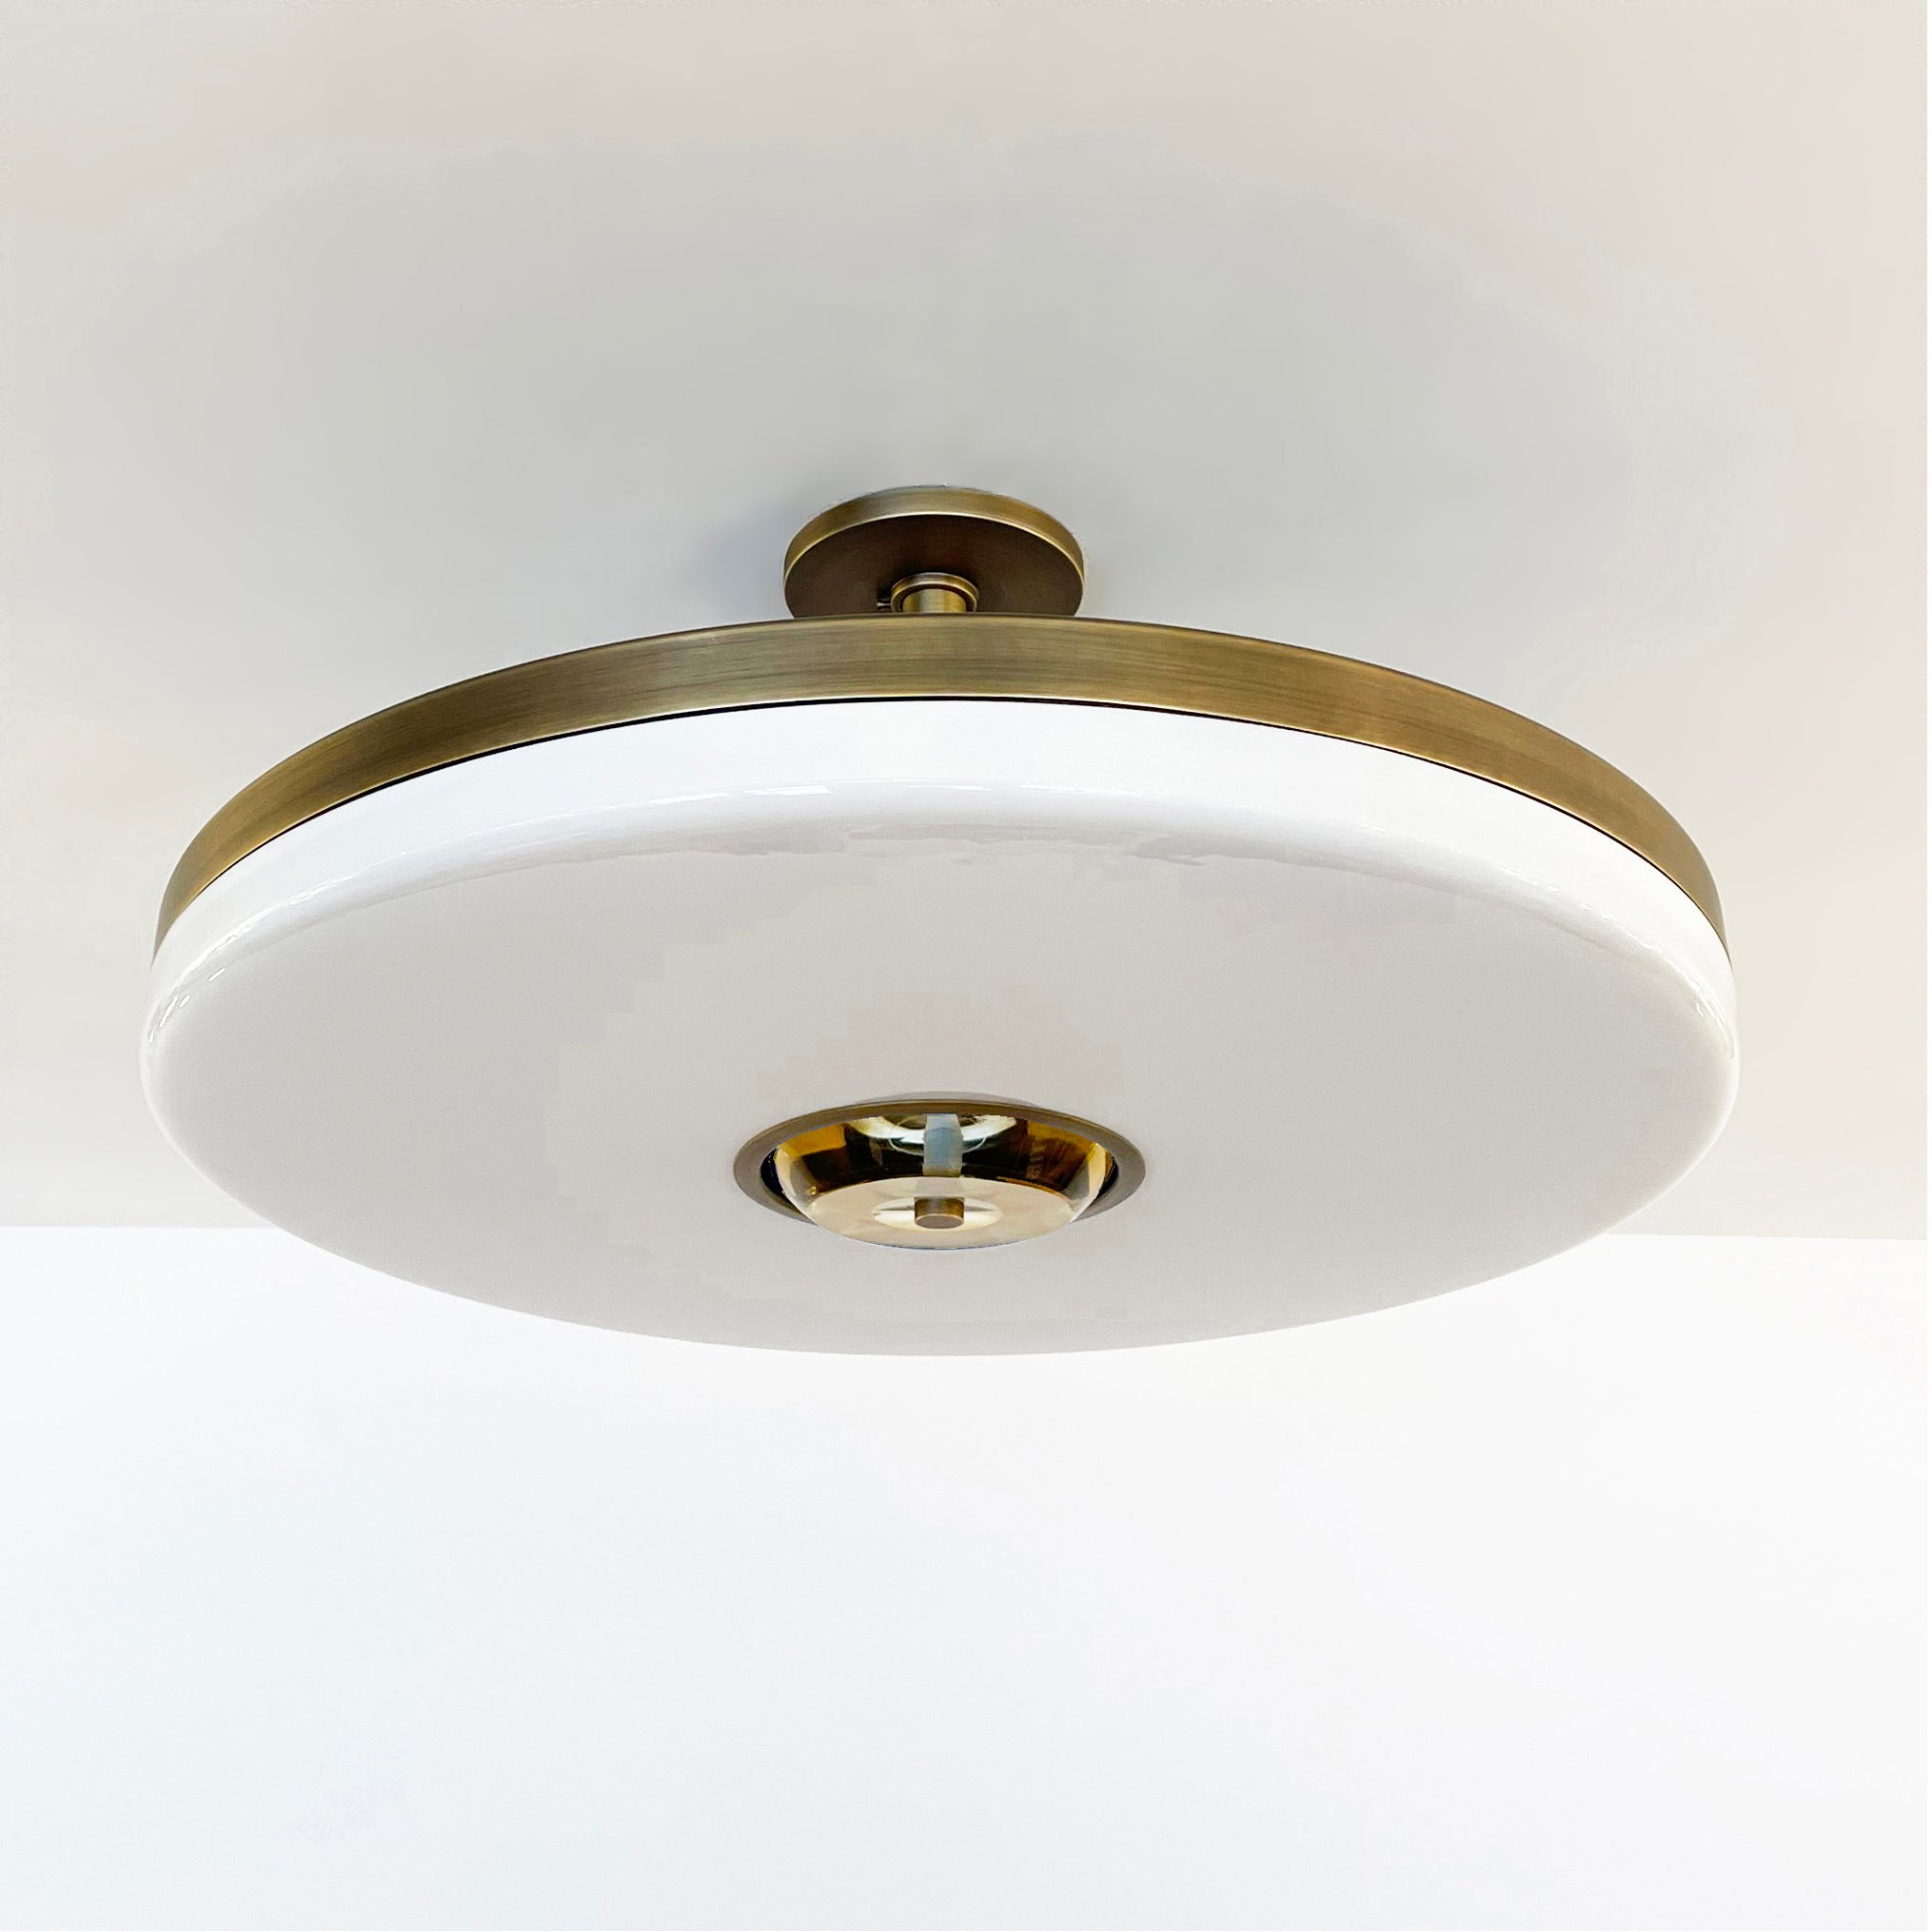 The Iris ceiling is designed around an expansive acrylic shade with a hand carved glass center. This versatile fixture can be installed as a pendant on a stem or as a true flush mount. Shown in our bronzo ottone finish. Price listed for stock model